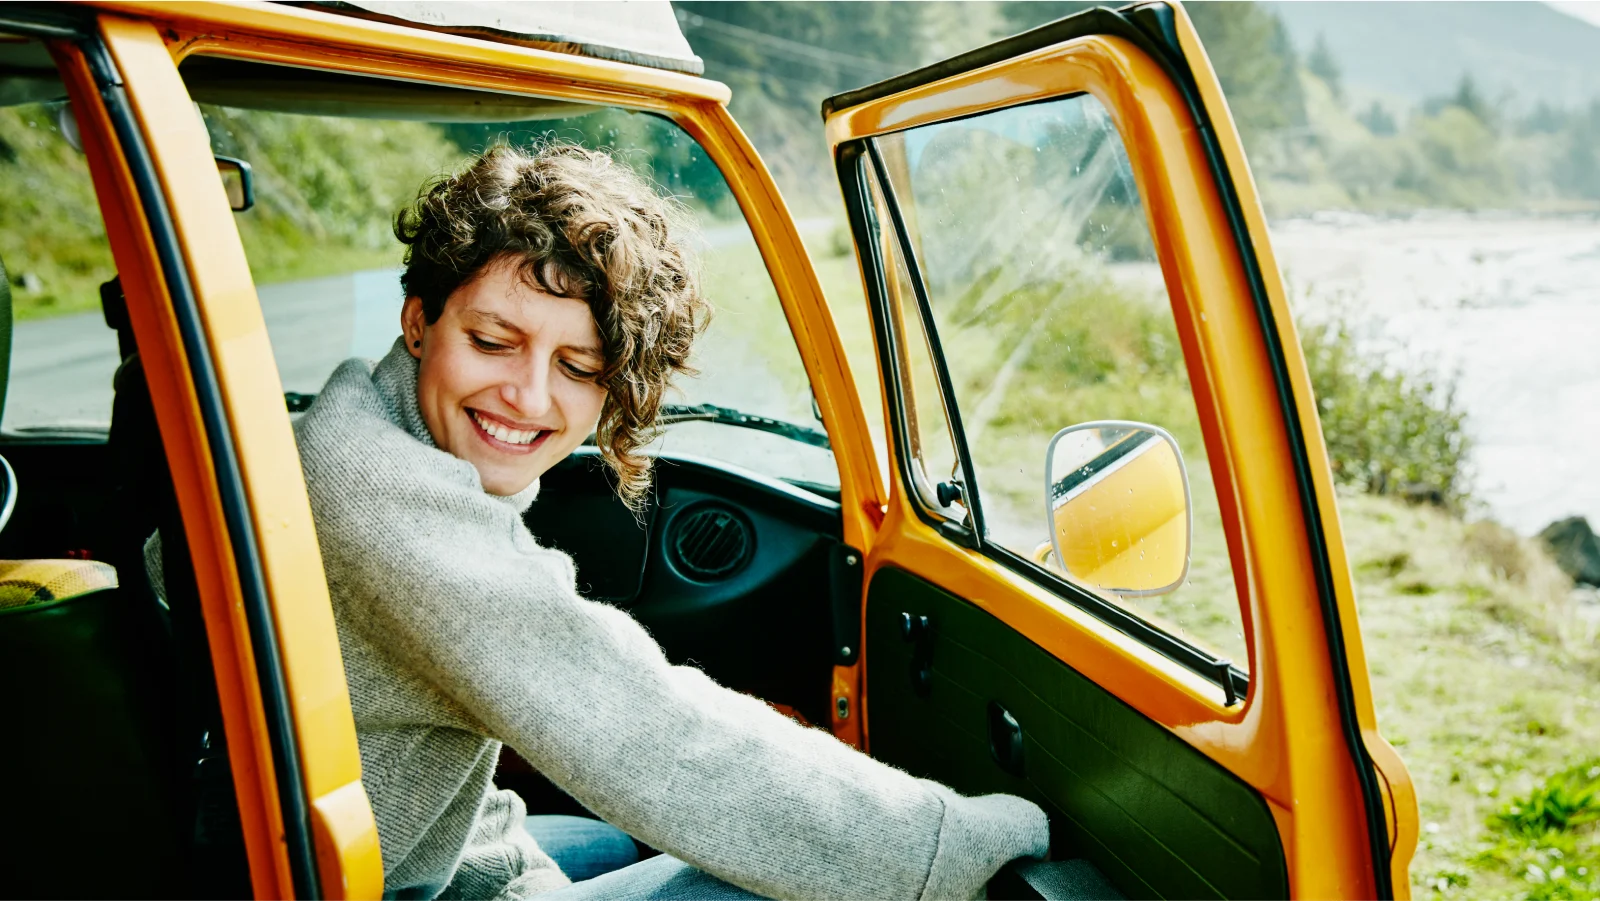 Smiling woman opening her car door to get out